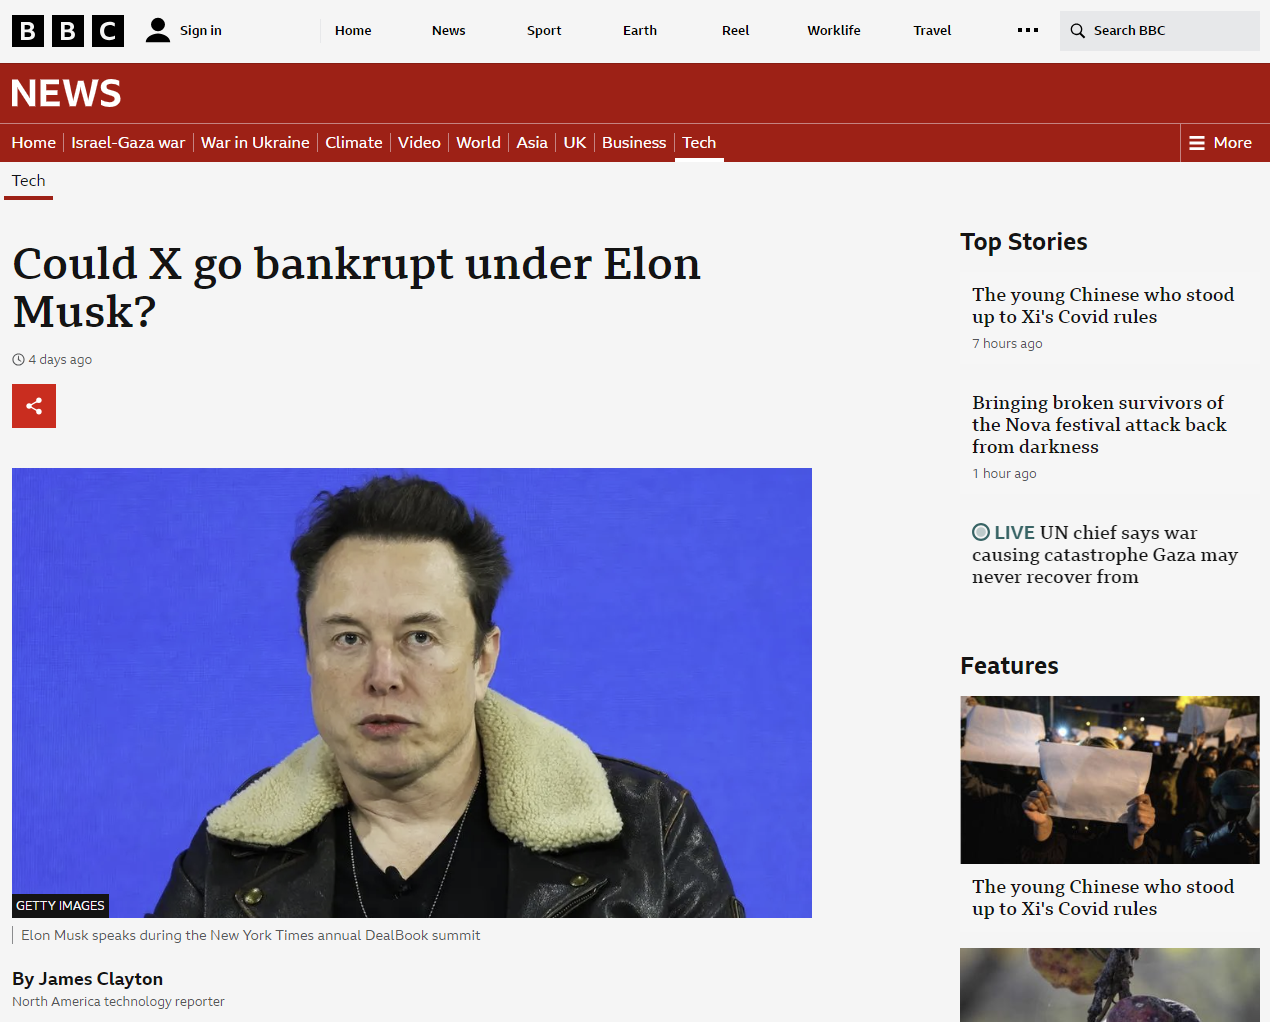 BBC article about Musk